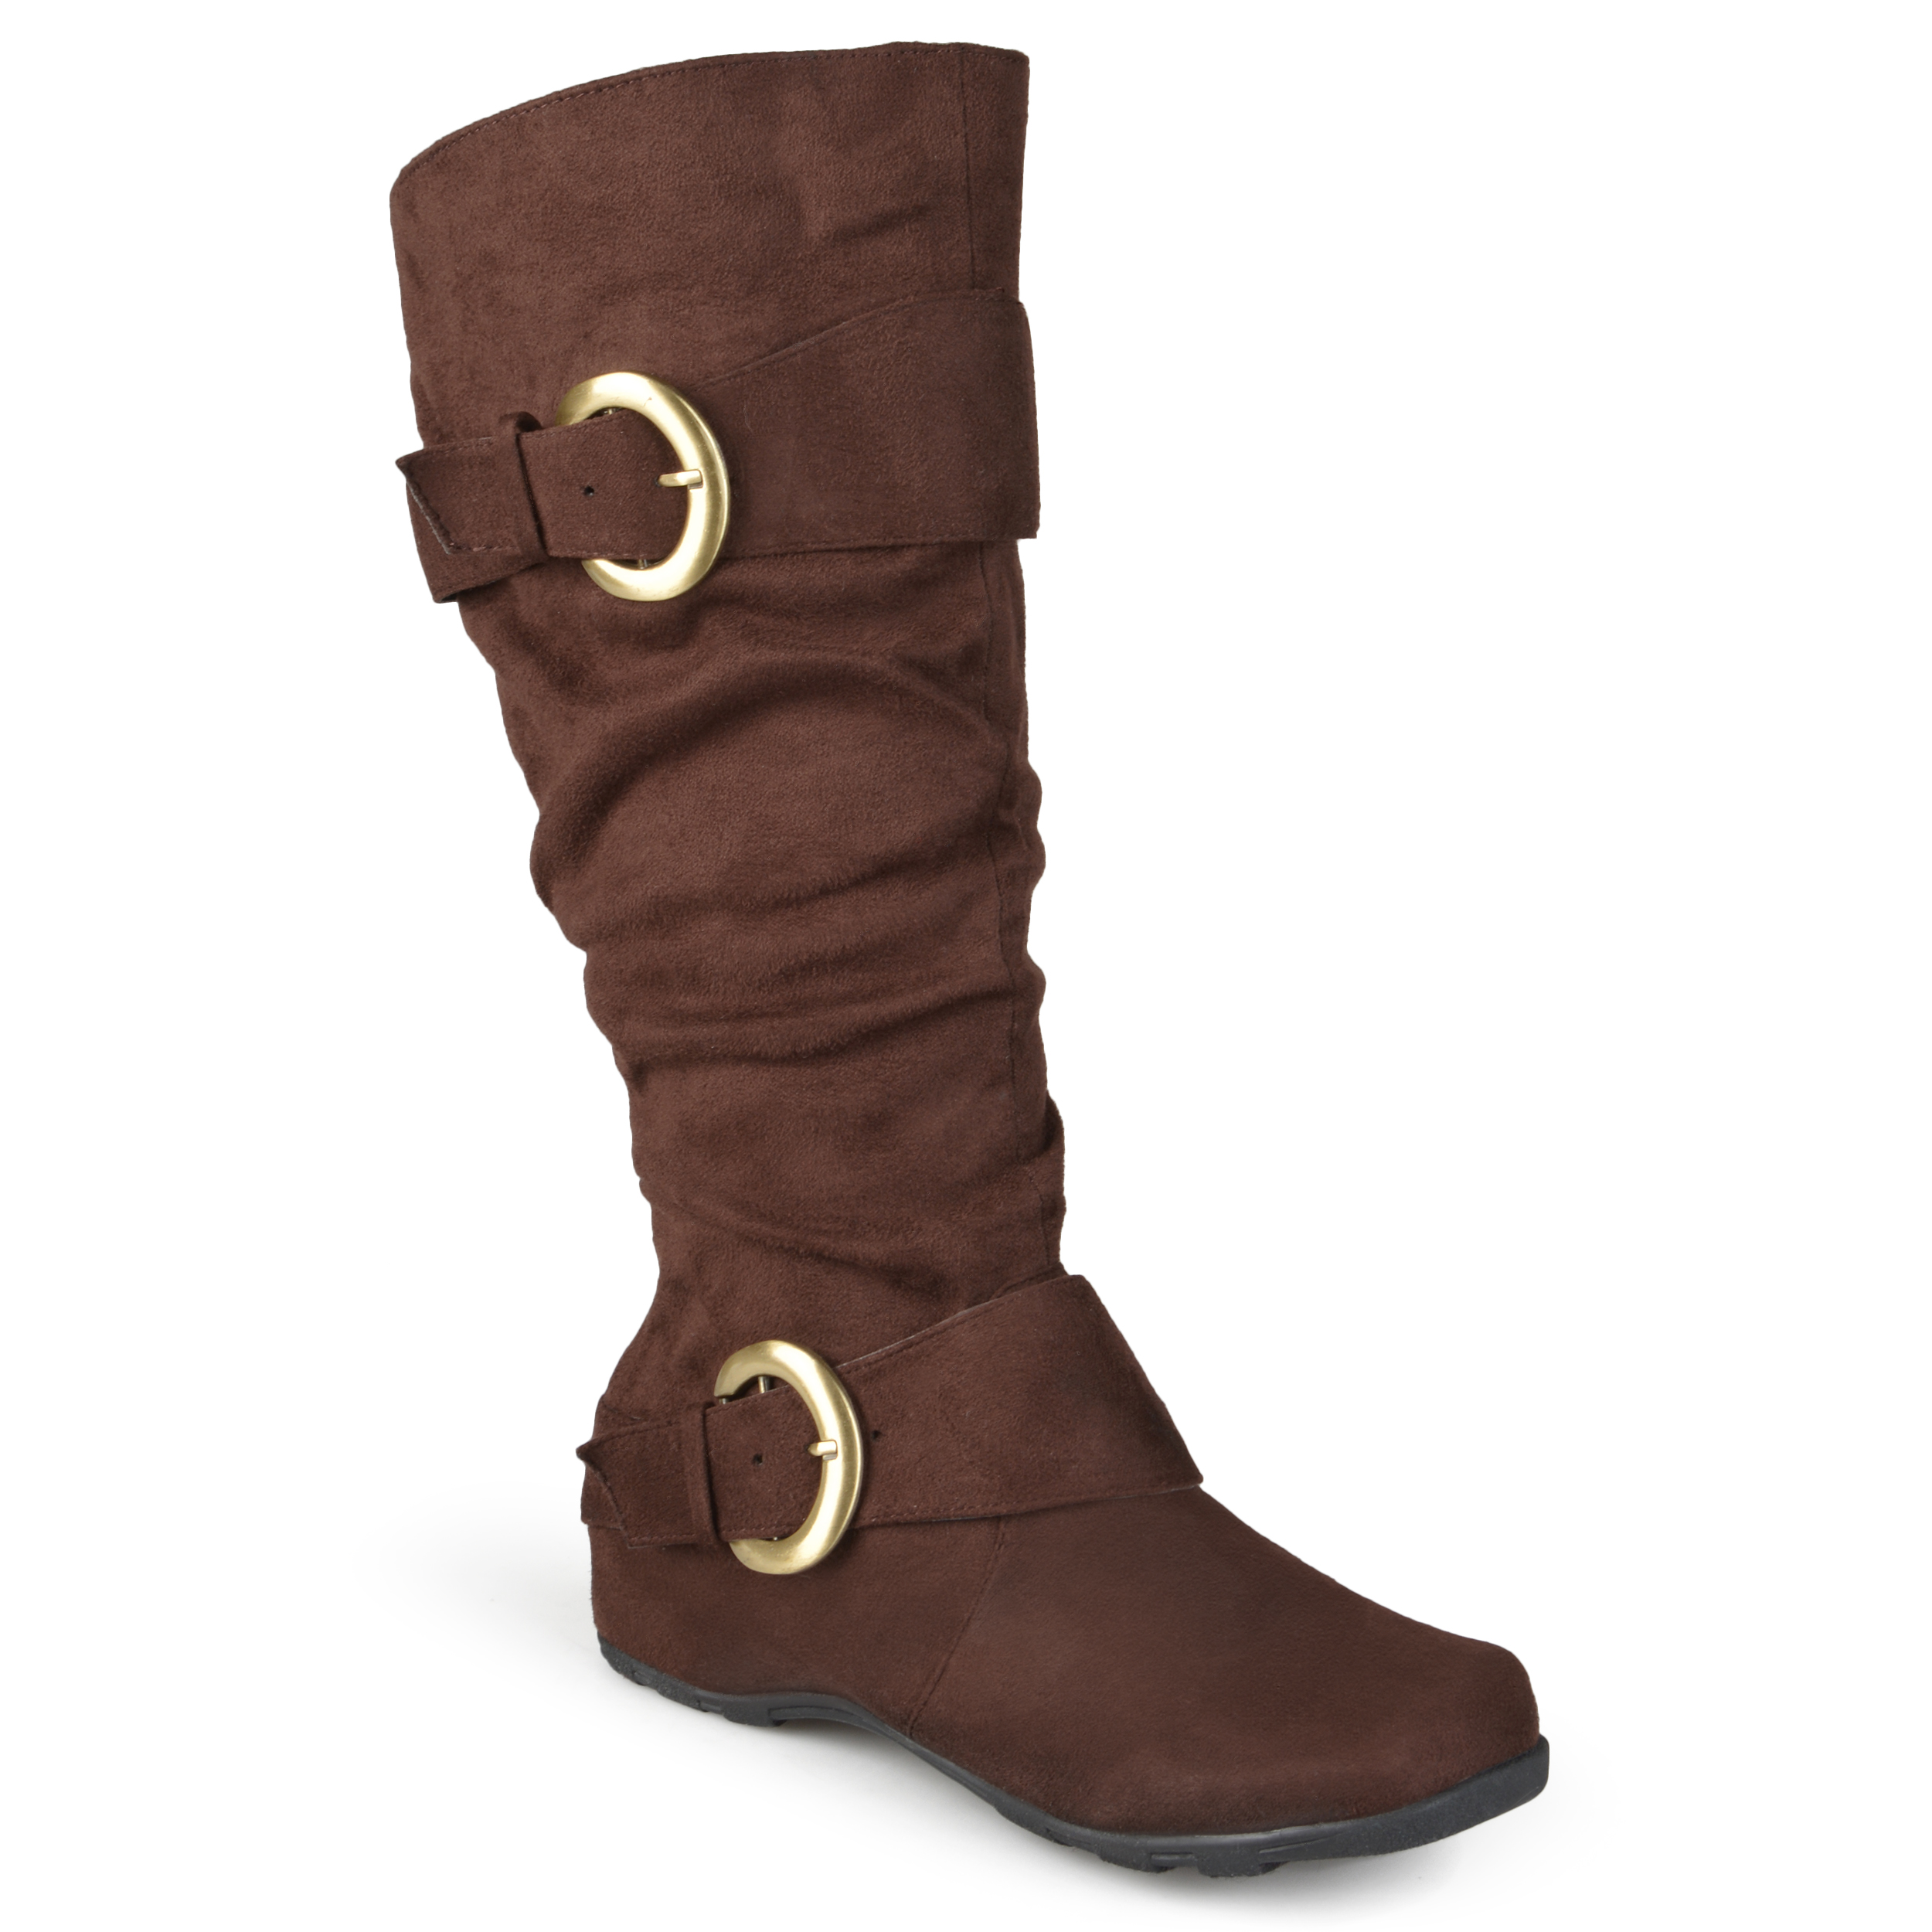 Brinley Co. Womens Wide Calf Dress Boot - image 1 of 8